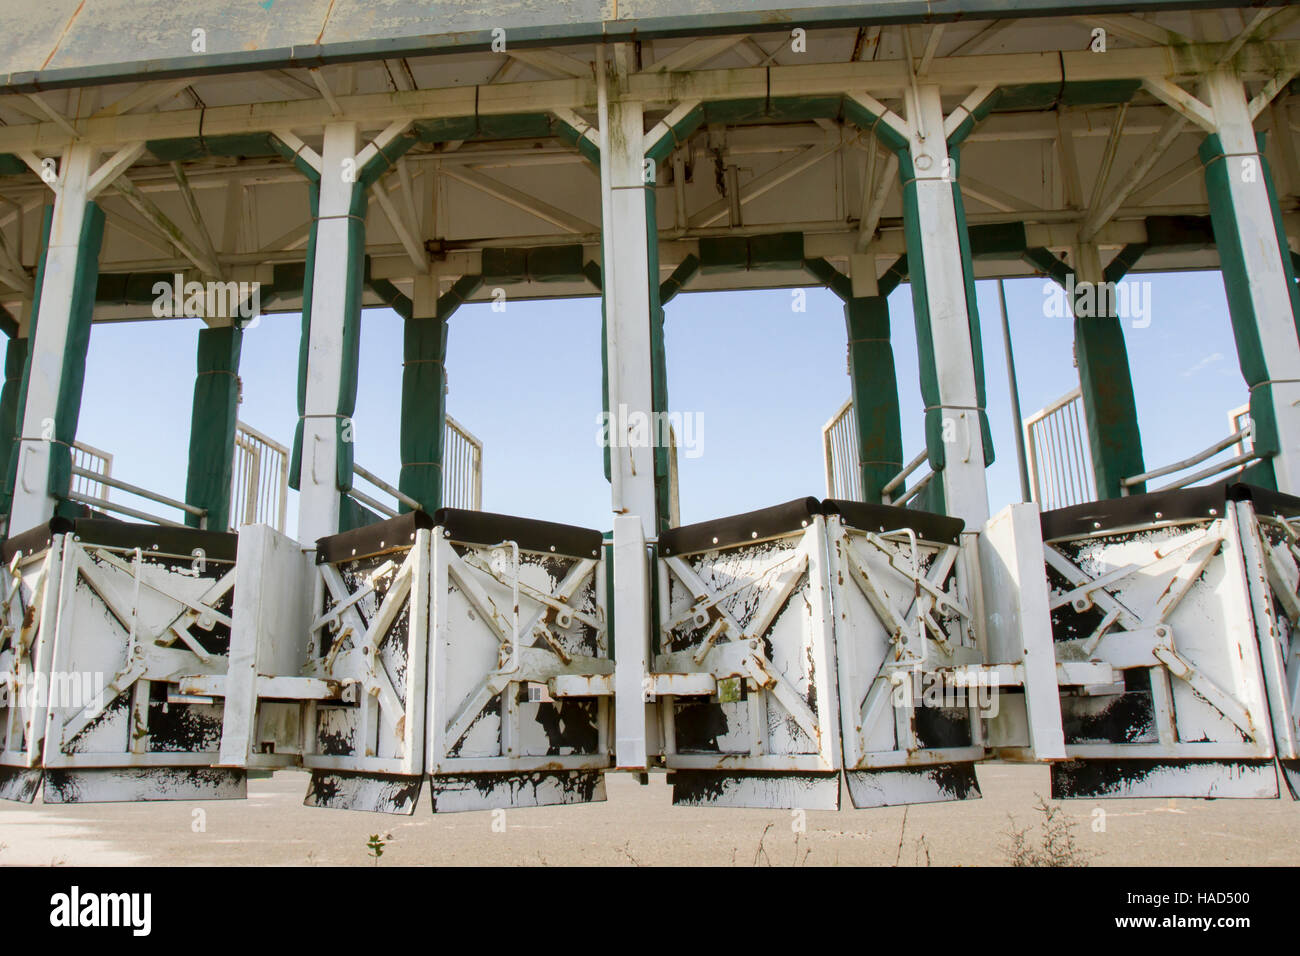 Empty horse racing starting gate rusting against blue skies. Stock Photo